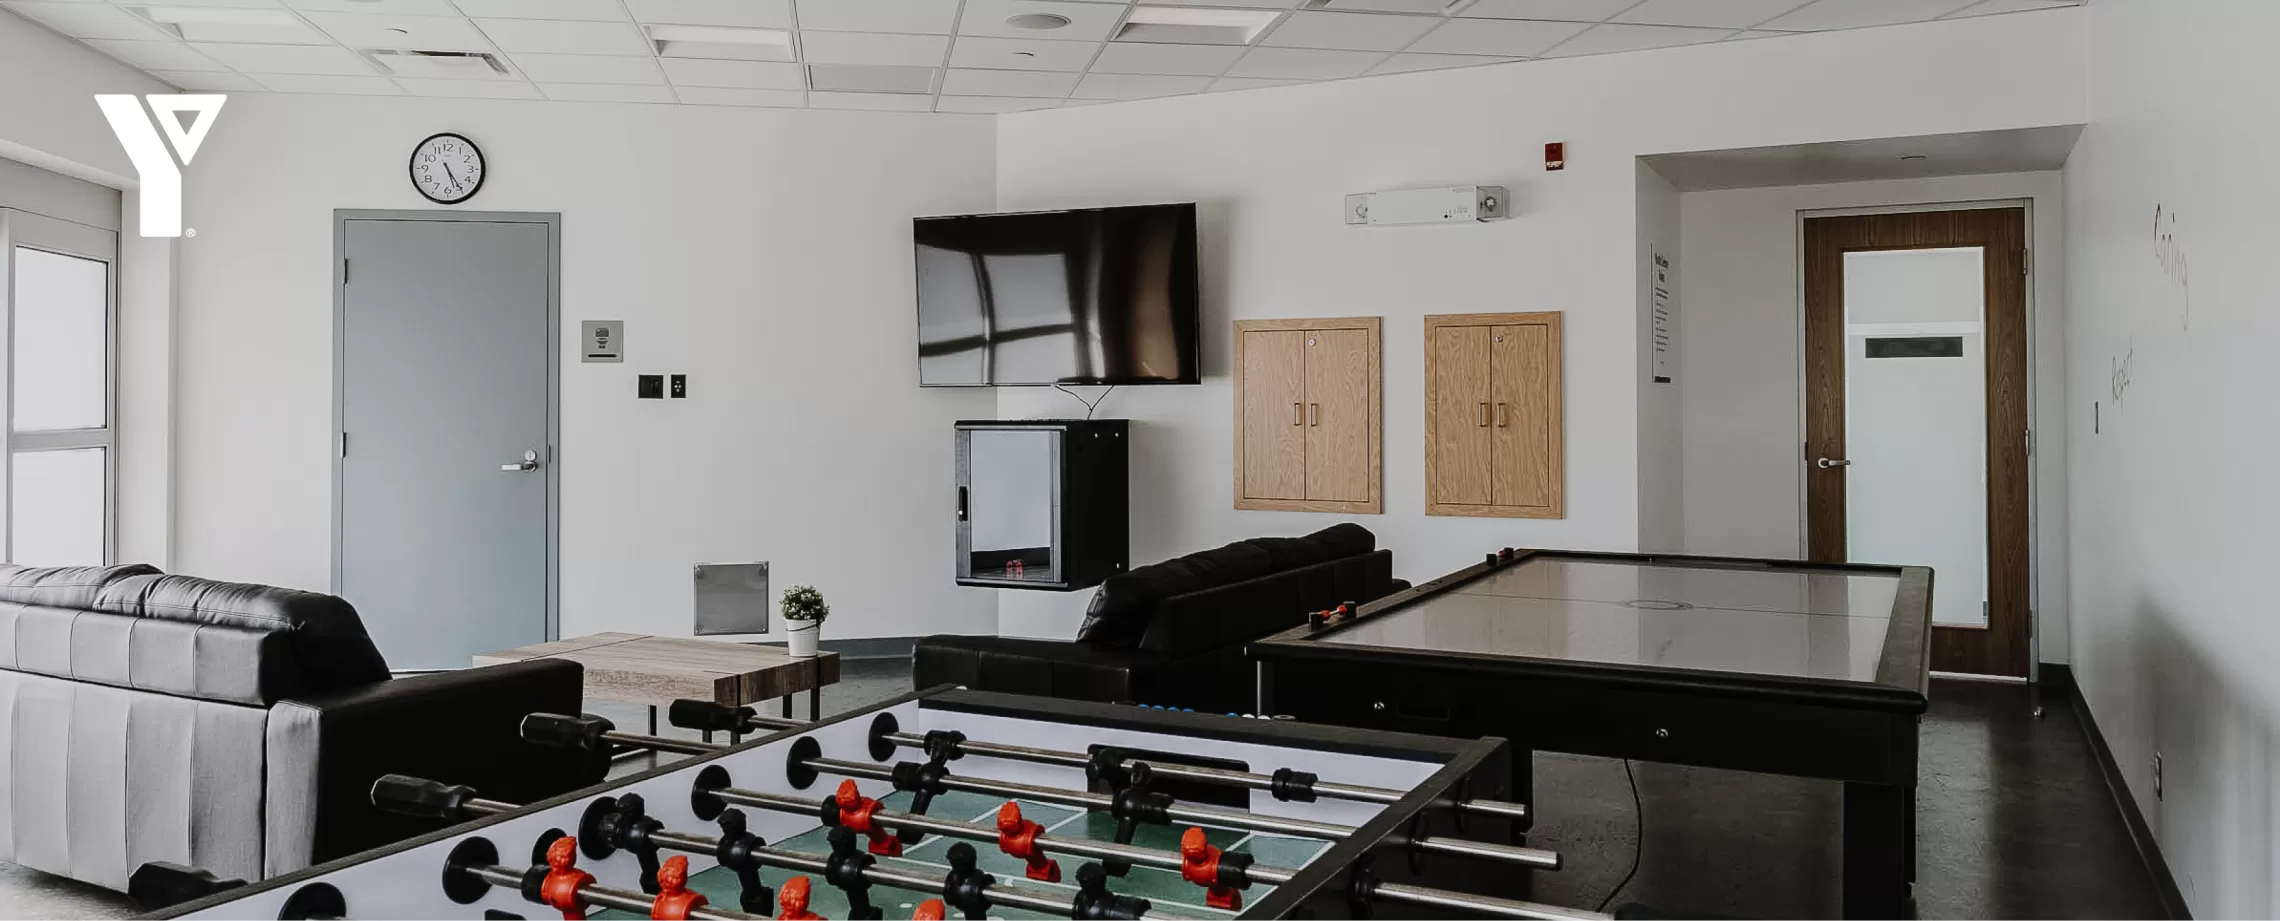 A room built for teens, featuring couches, a TV mounted on a wall with a gaming system, foosball table and air hockey table.